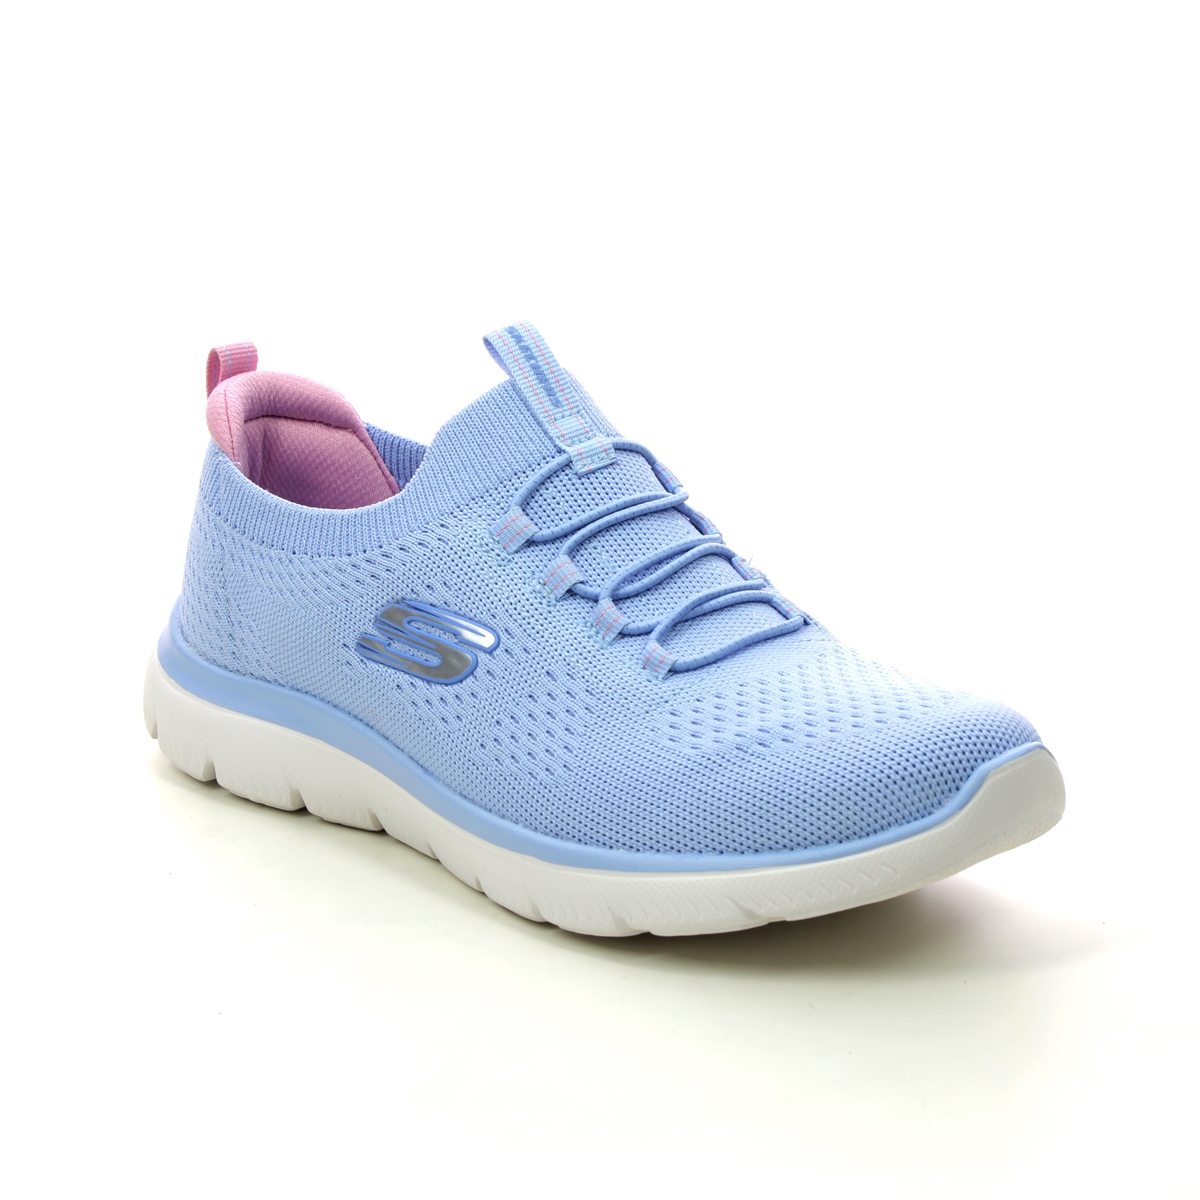 Skechers Summits Bungee LBMT Light blue Womens trainers 150116 in a Plain Textile in Size 8